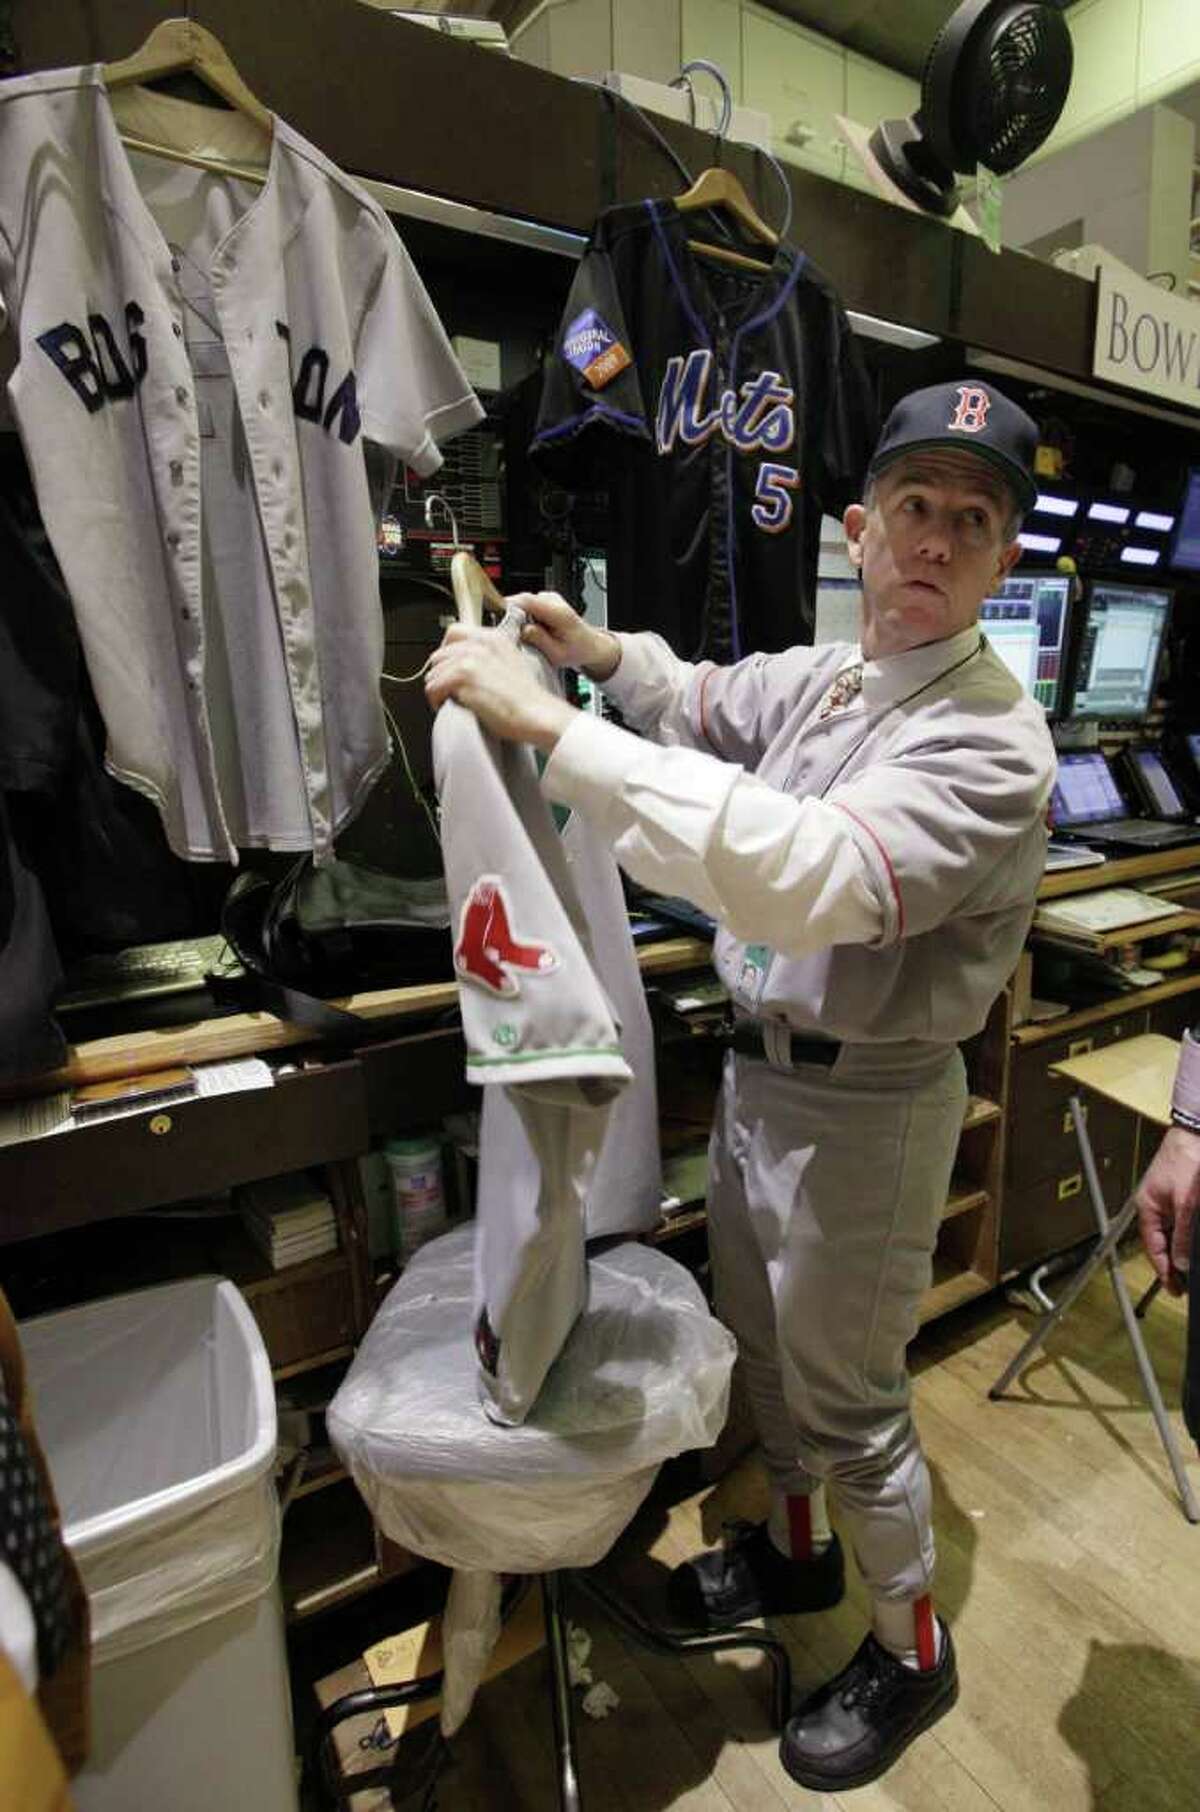 Michael Quinn, with Bowers Securities, is dressed in Boston Red Sox uniform, and sorts through other of his baseball jerseys, as he works on the floor of the New York Stock Exchange, on Major League Baseball's opening day, Thursday, March 31, 2011.